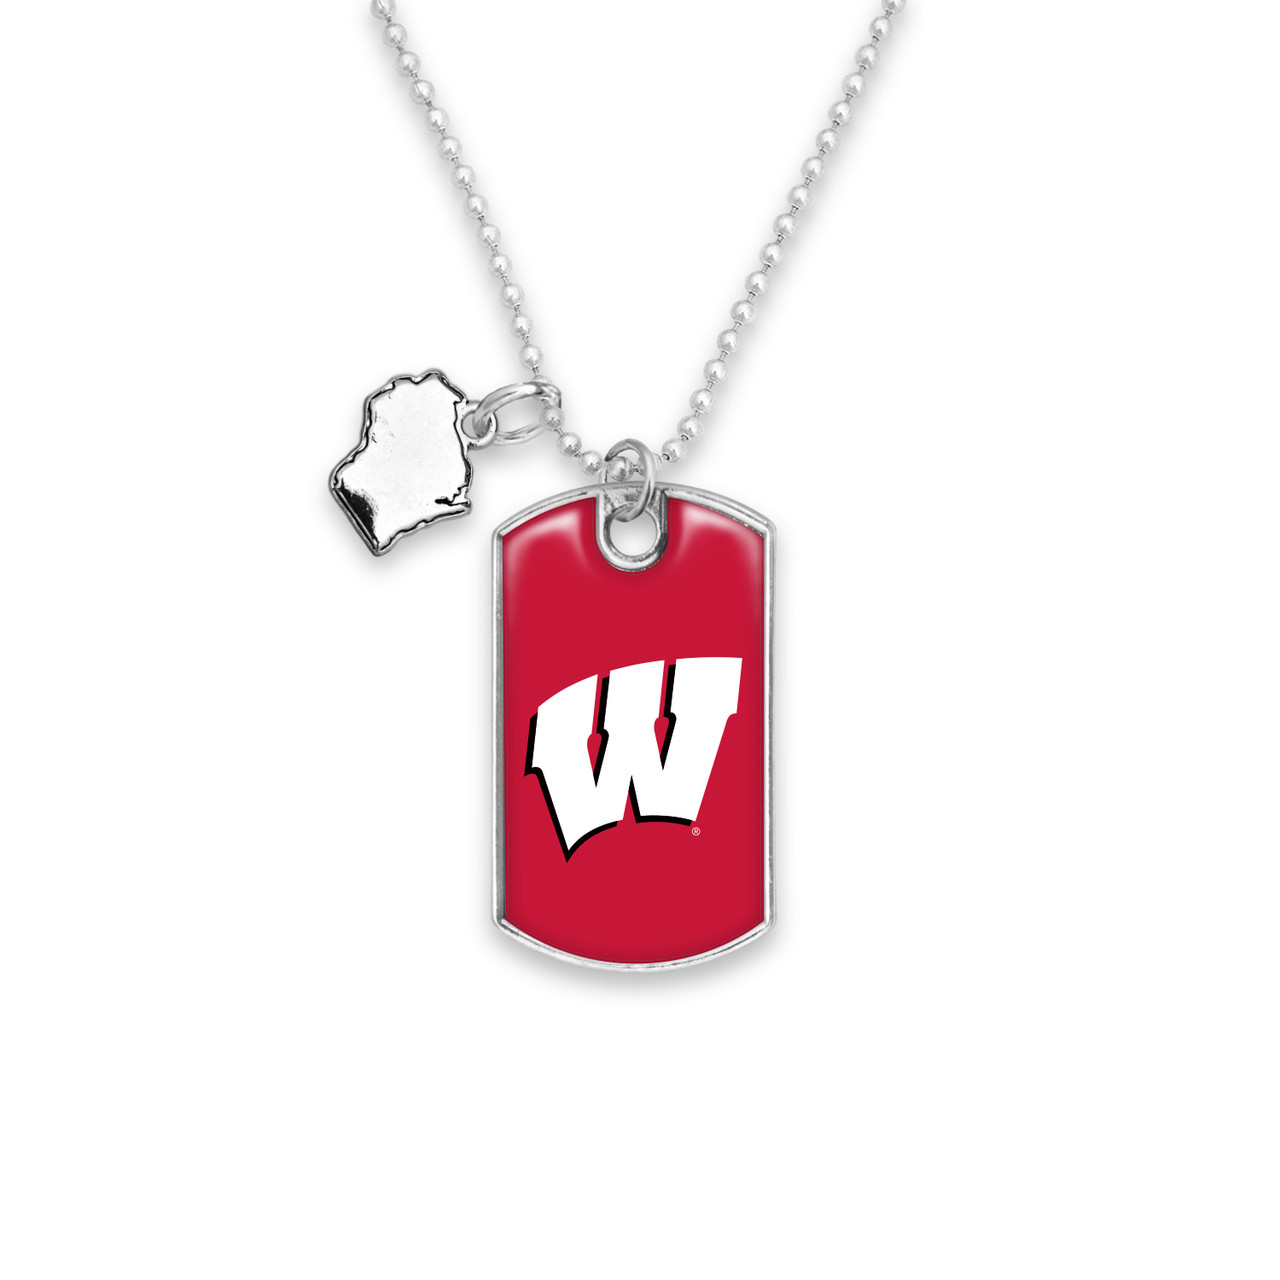 Wisconsin Badgers Car Charm- Rear View Mirror Dog Tag with State Charm